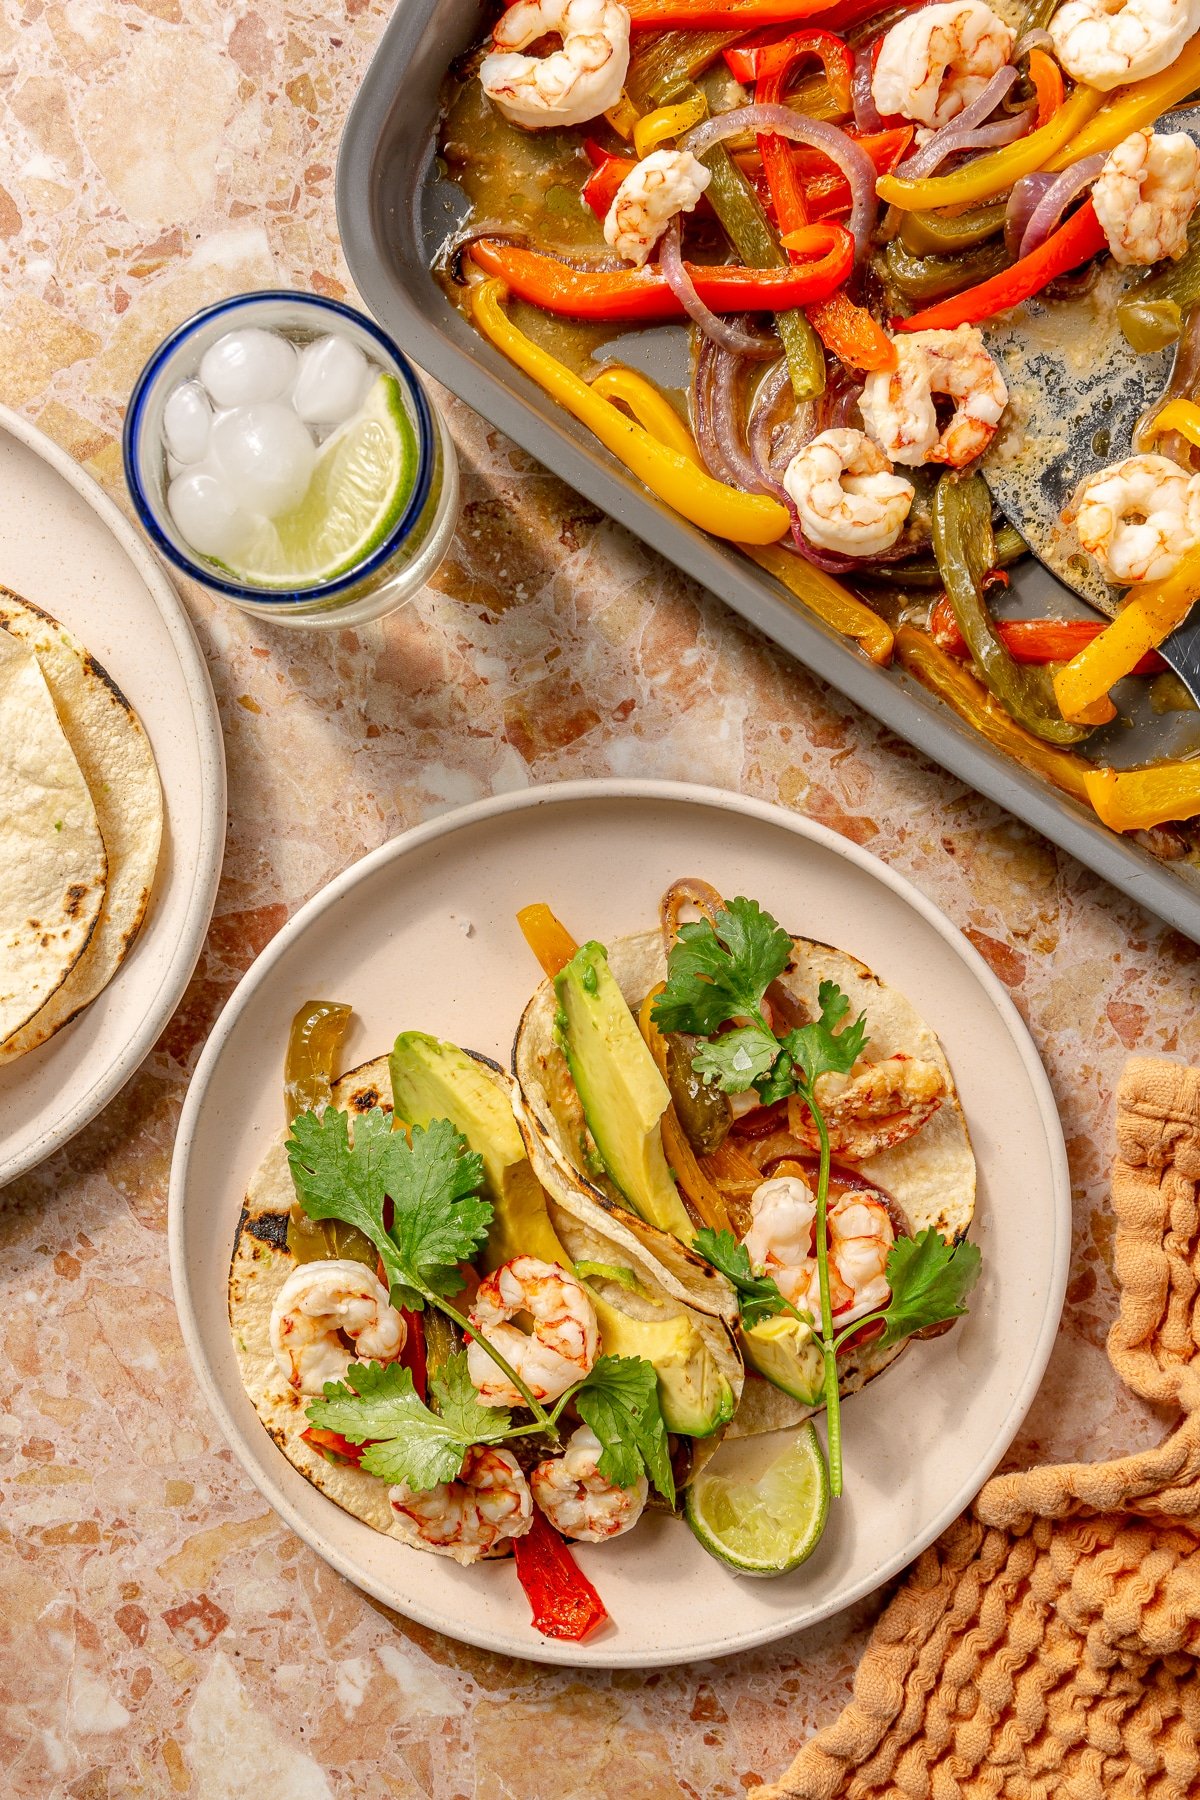 Shrimp fajitas sit on a cream colored plate. The remaining roasted veggies and shrimp sit on the baking tray which sits to the side. An iced beverage sits in the corner.